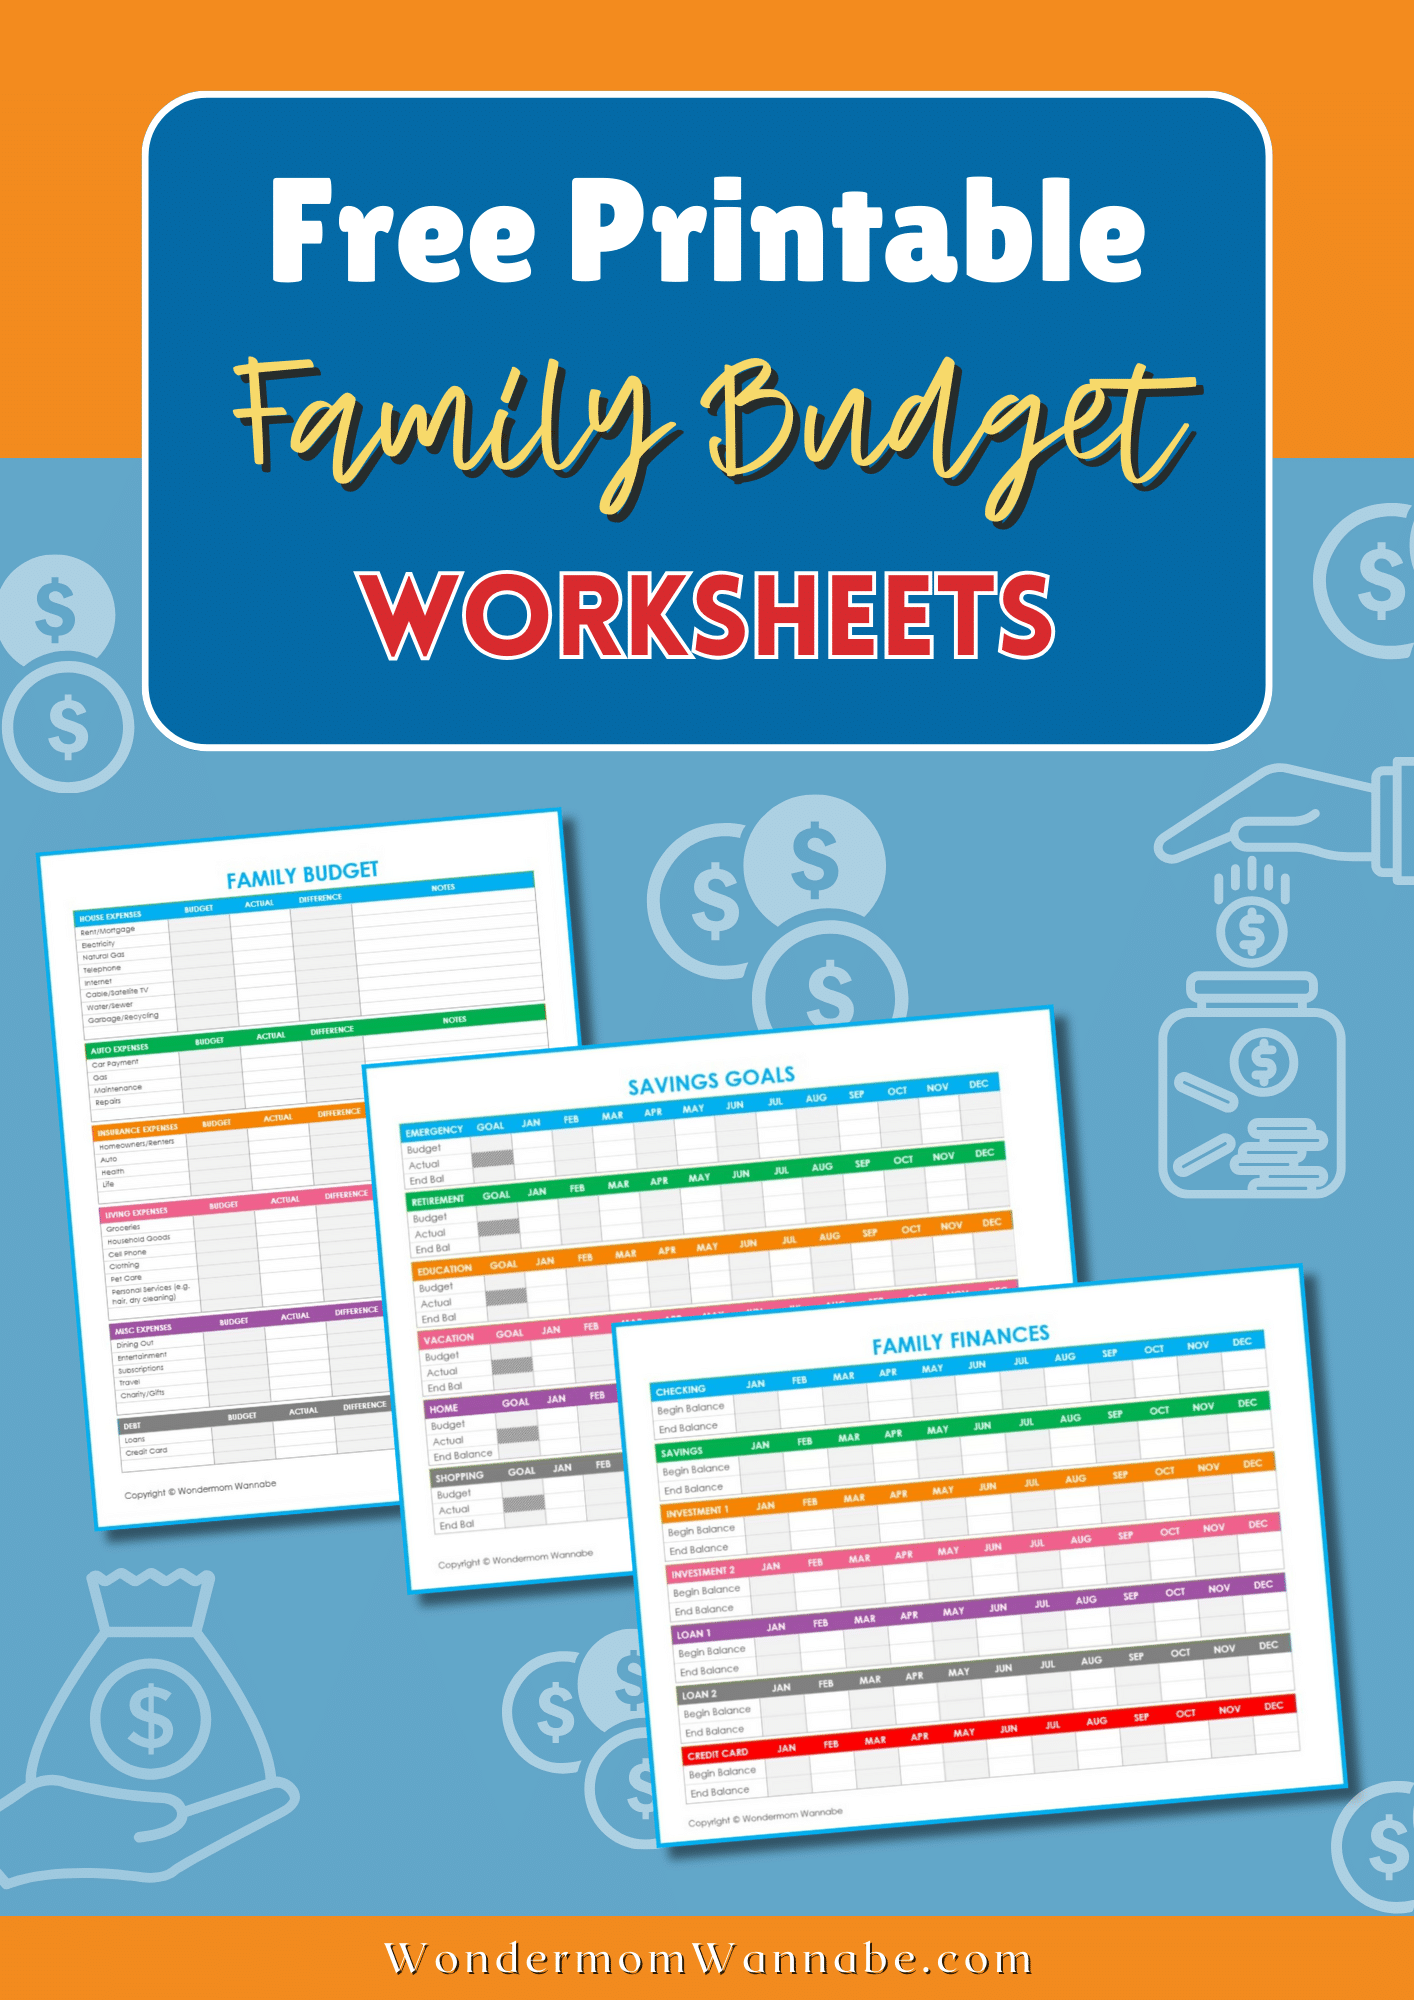 Download our free printable budget worksheets for your family's financial planning needs.